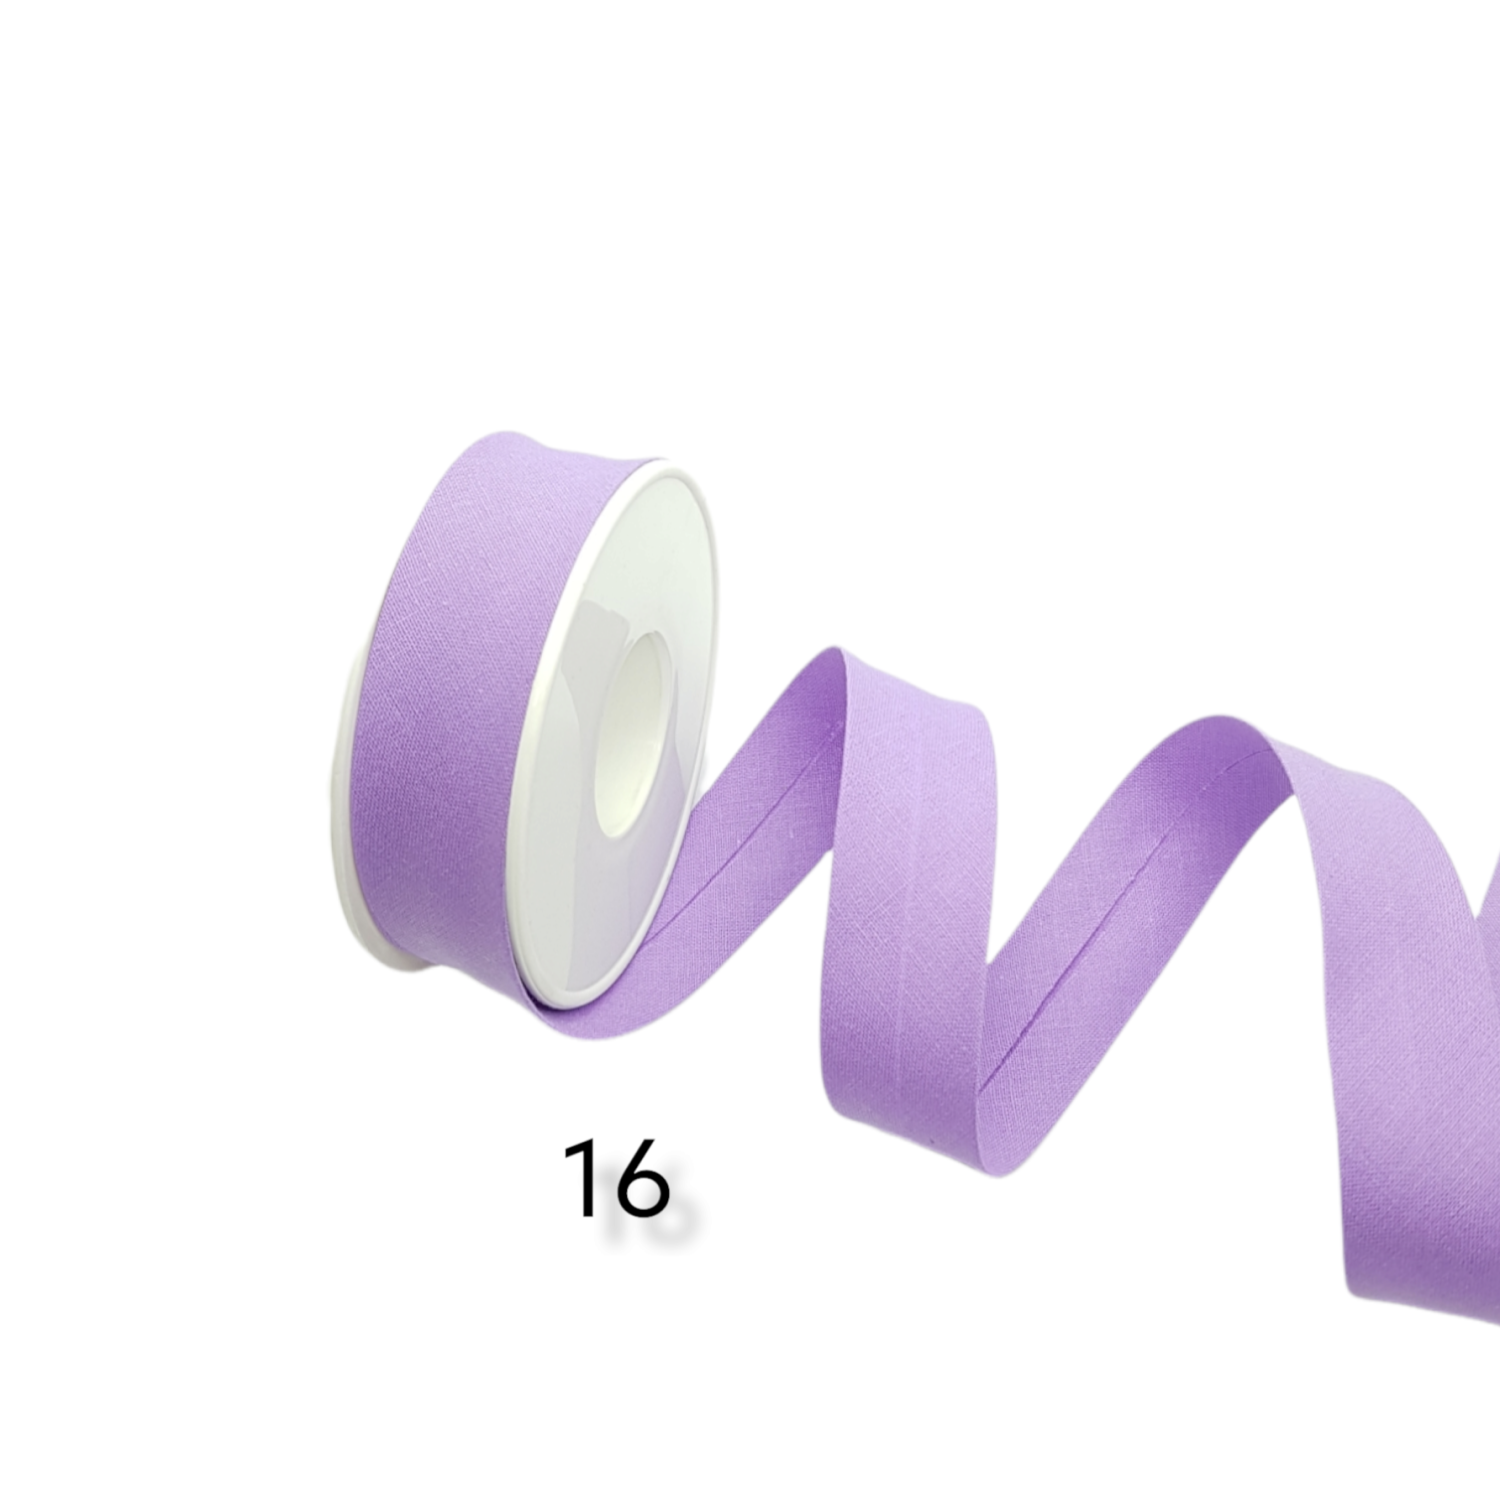 hobby trendy 100% cotton bias binding tape (single fold) 20mm-13/16inch (5meters- 5.46yards) for sewing, seaming, binding, hemming, piping, quilting 16 lilac